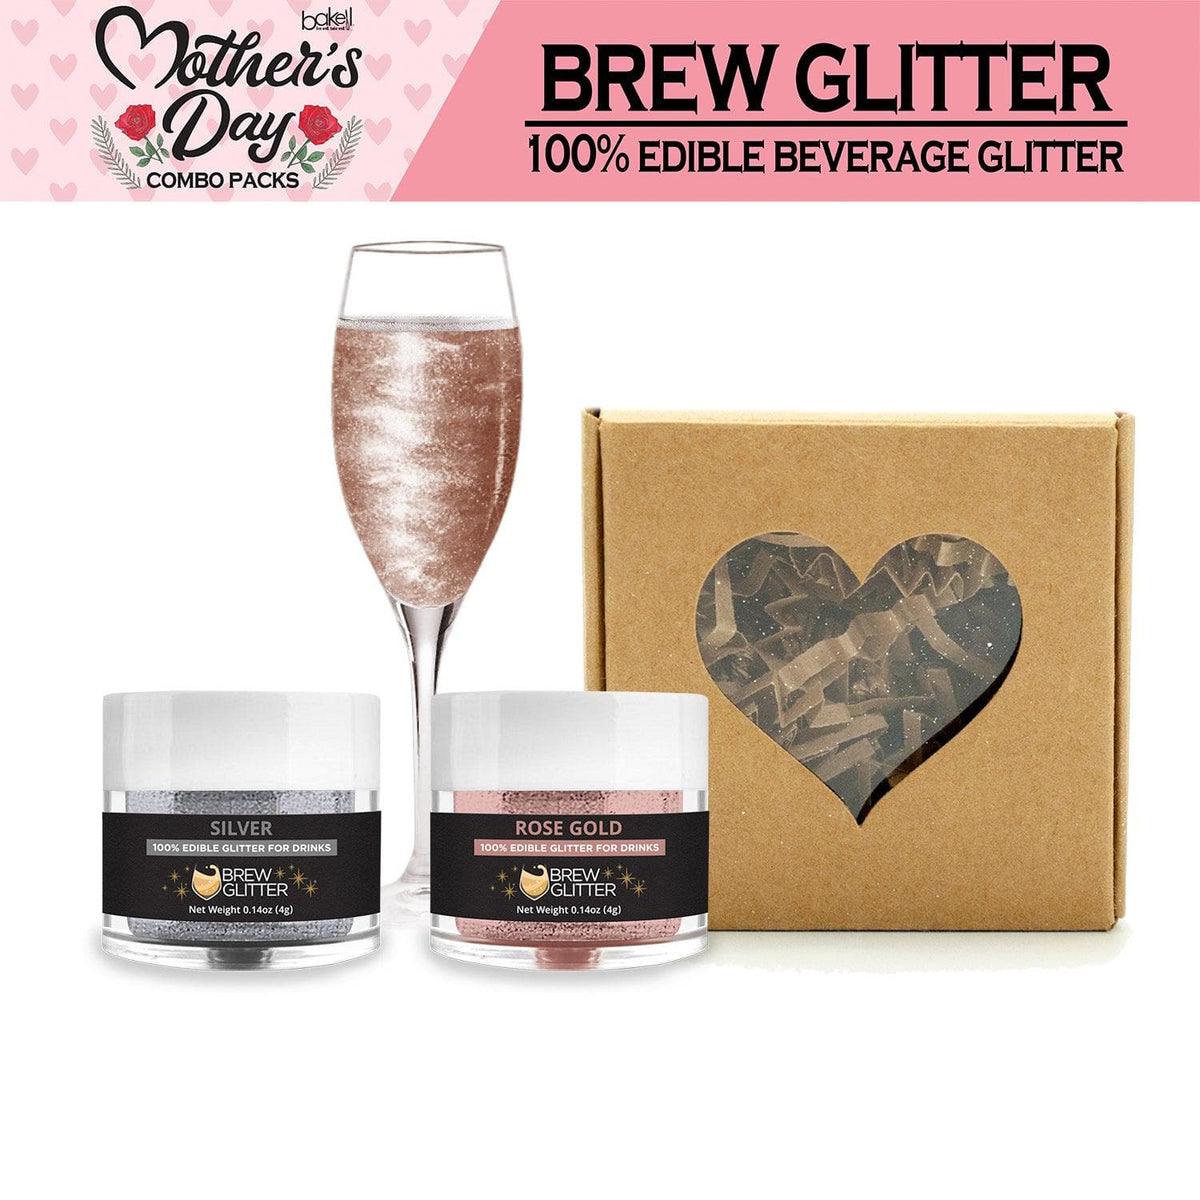 Mother's Day Brew Glitter Revelry Combo Pack Collection (2PC SET)